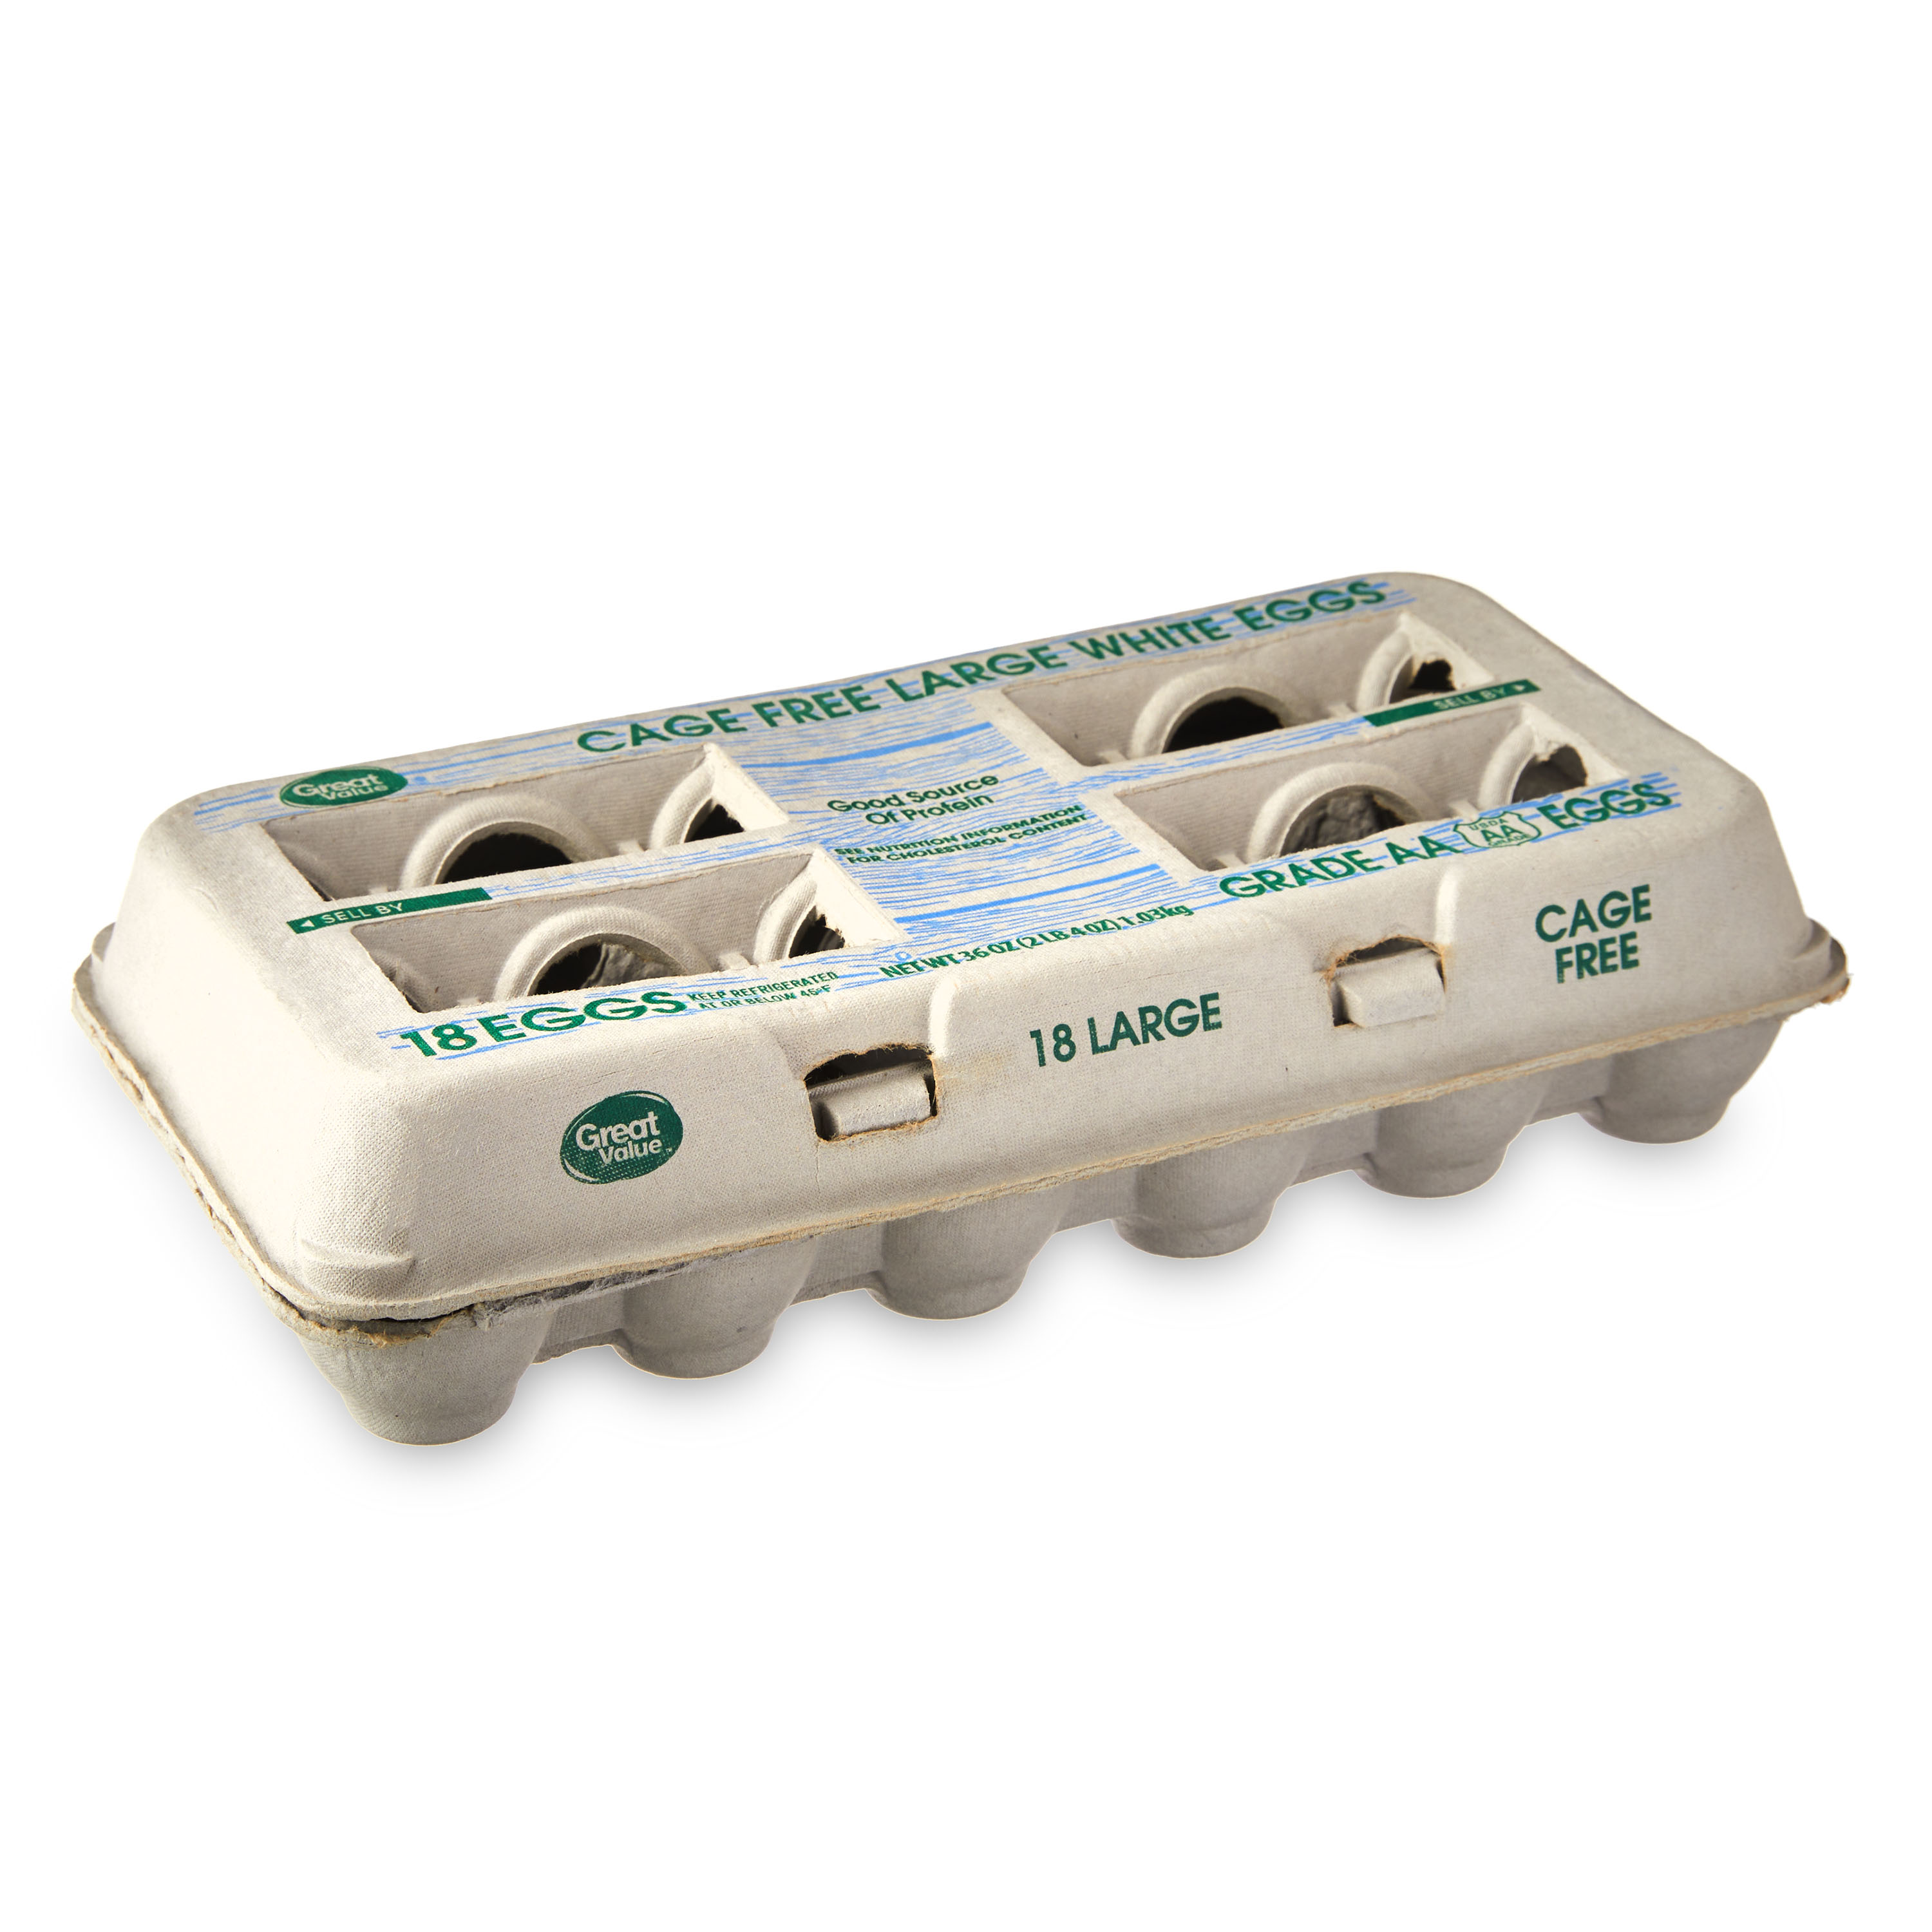 Great Value Cage-Free Large White Eggs, 18 Count - image 1 of 7